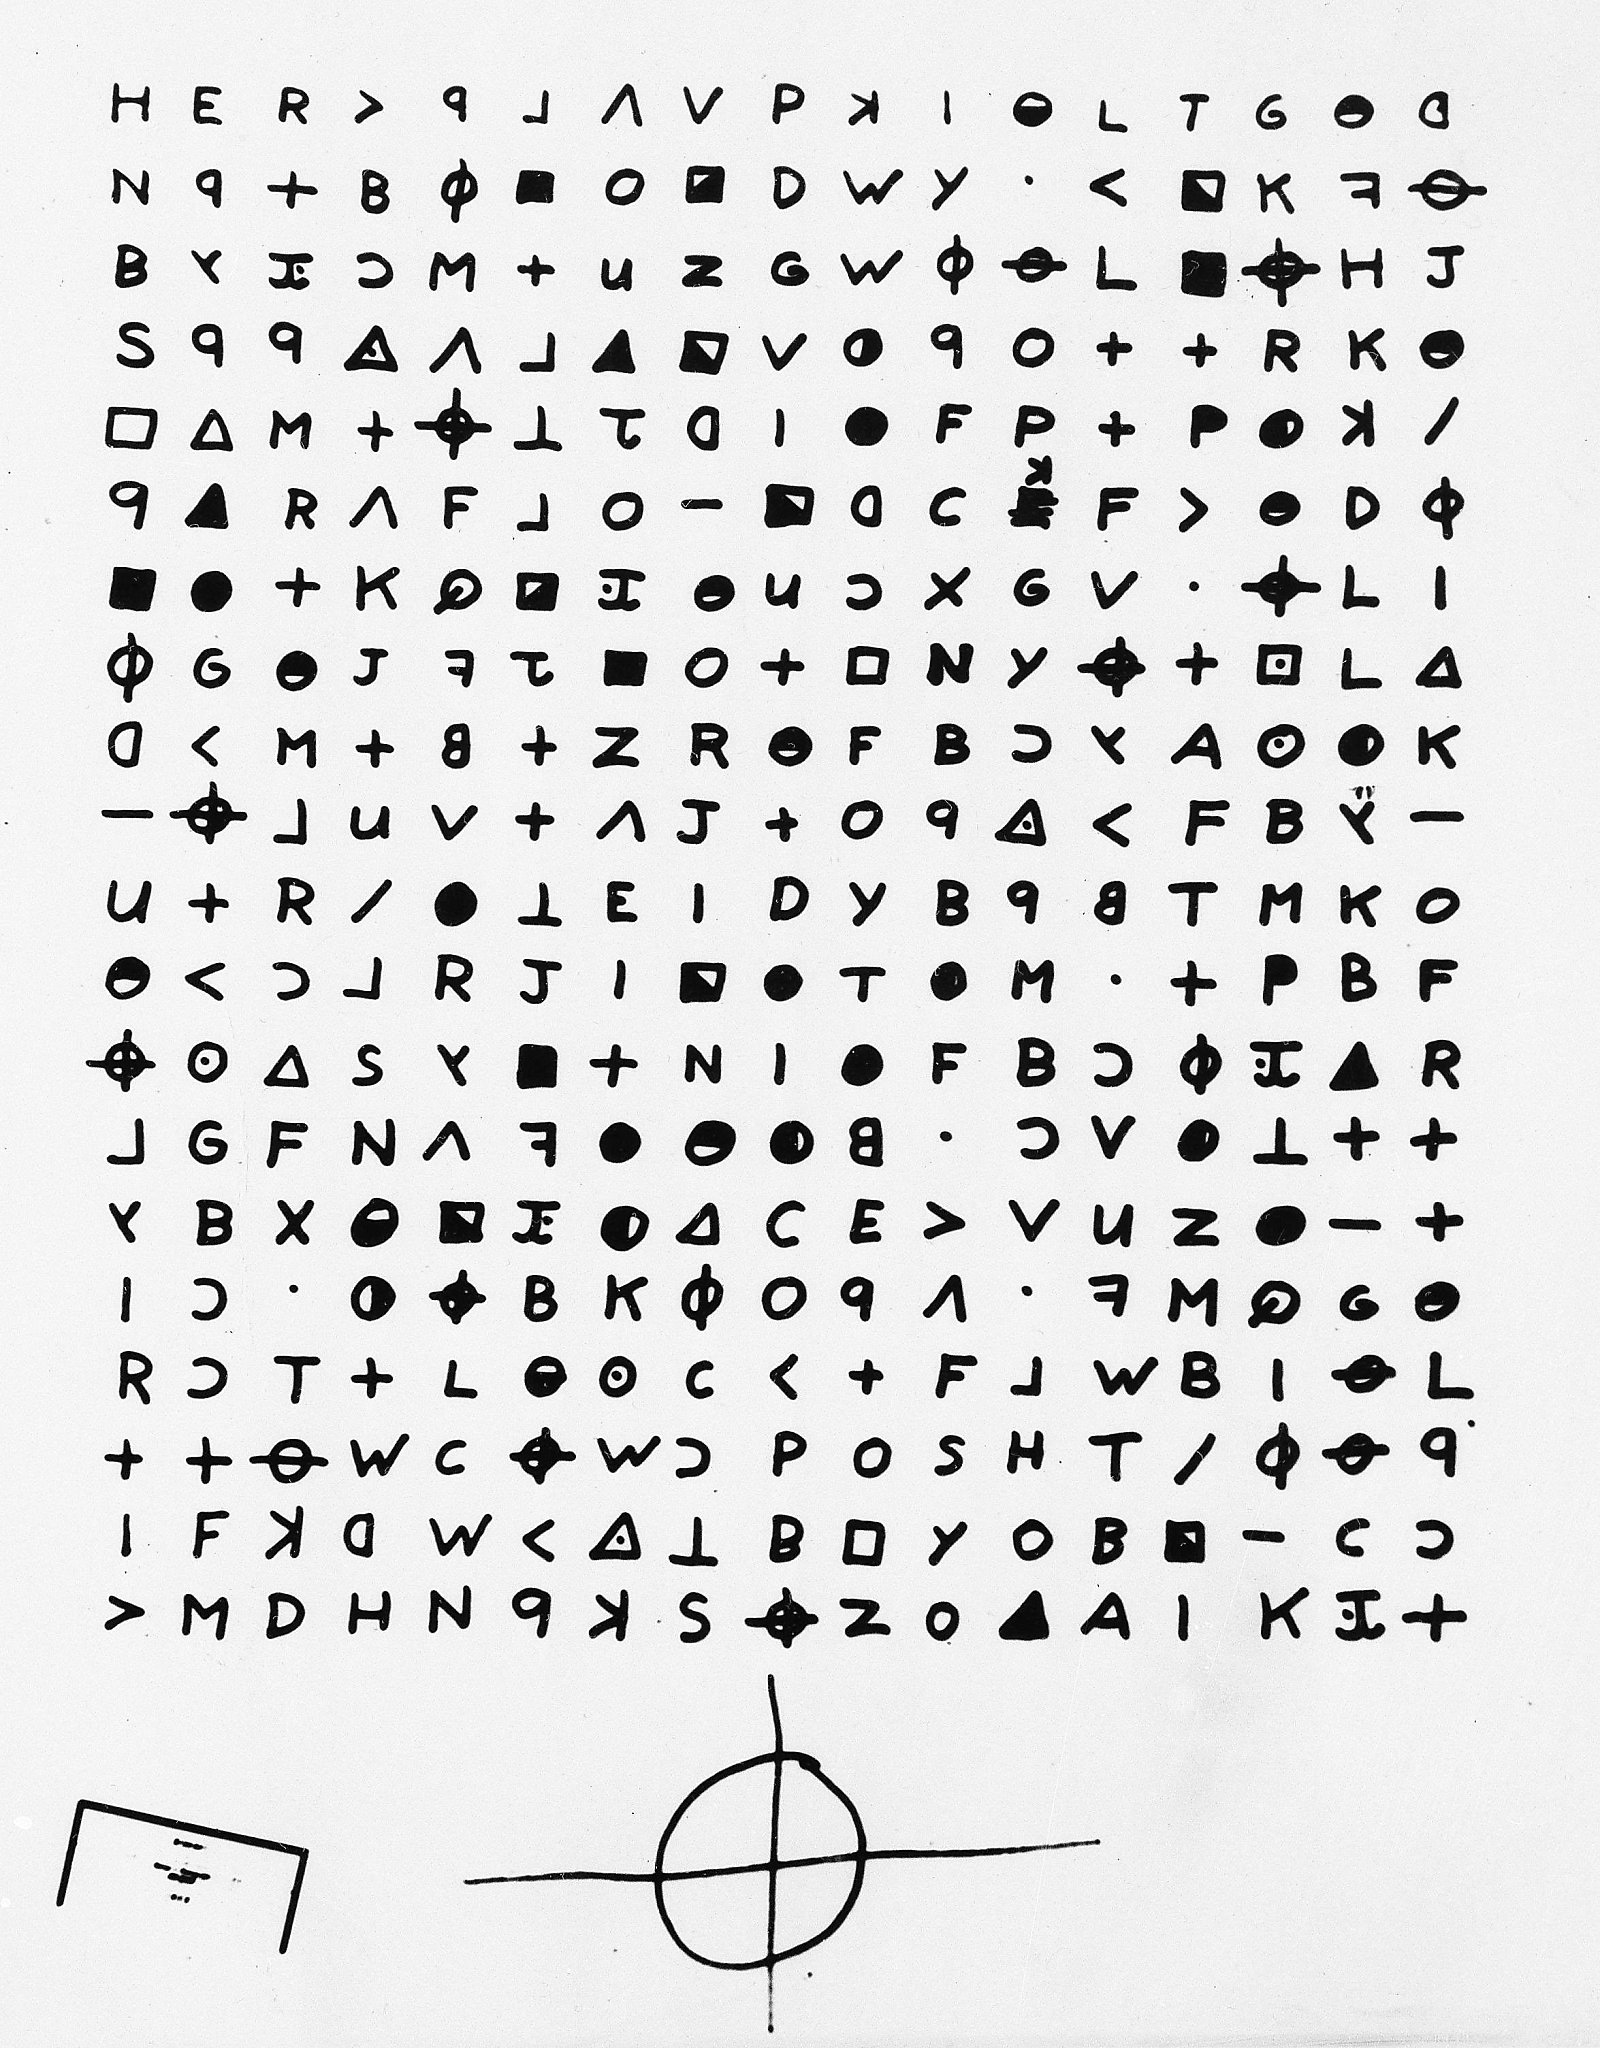 Zodiac killer theories still rolling in after 45 years - SFGate